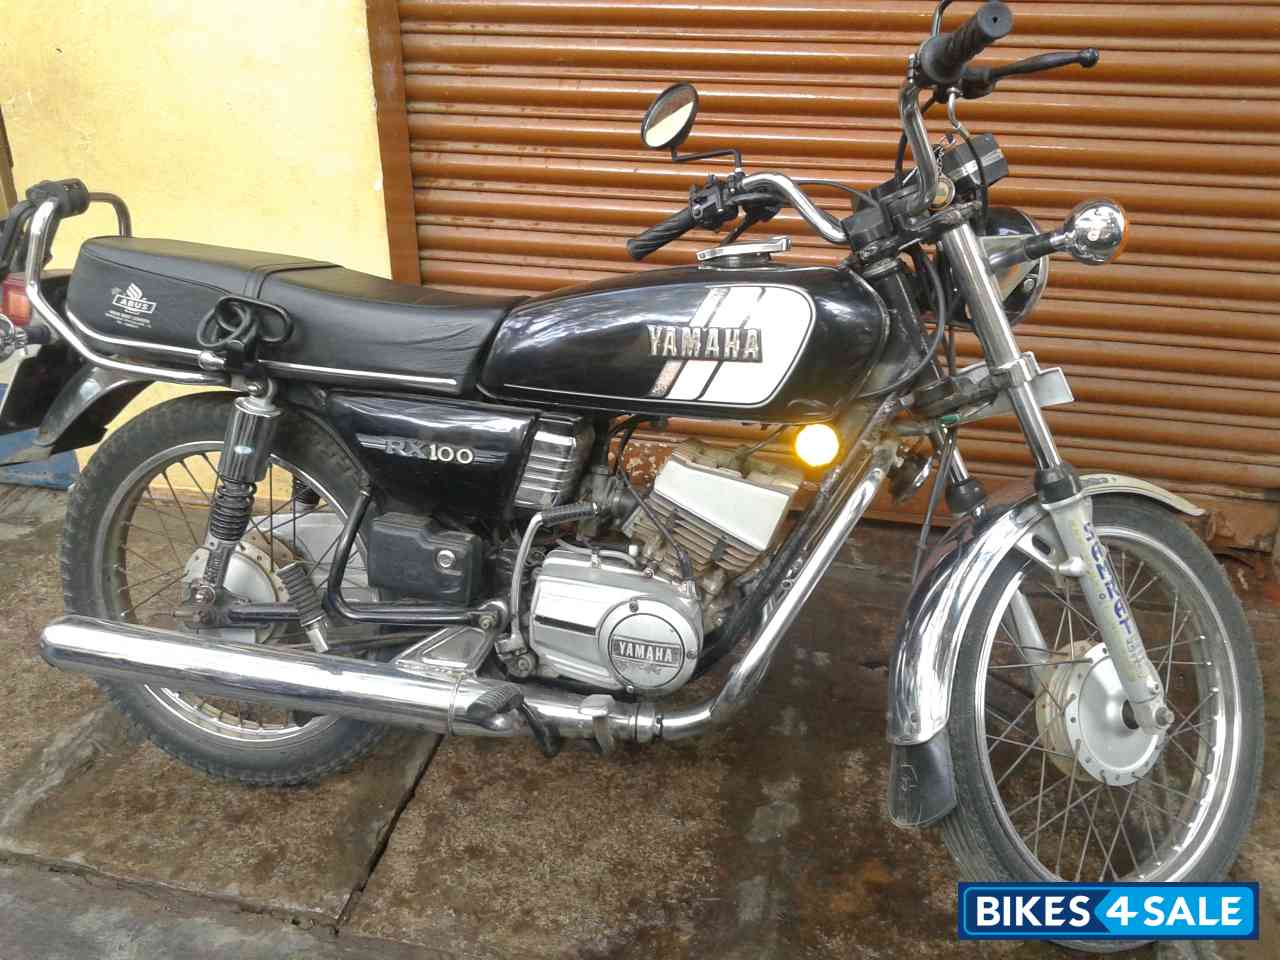 Used 1994 Model Yamaha Rx 100 For Sale In Bangalore Id 100463